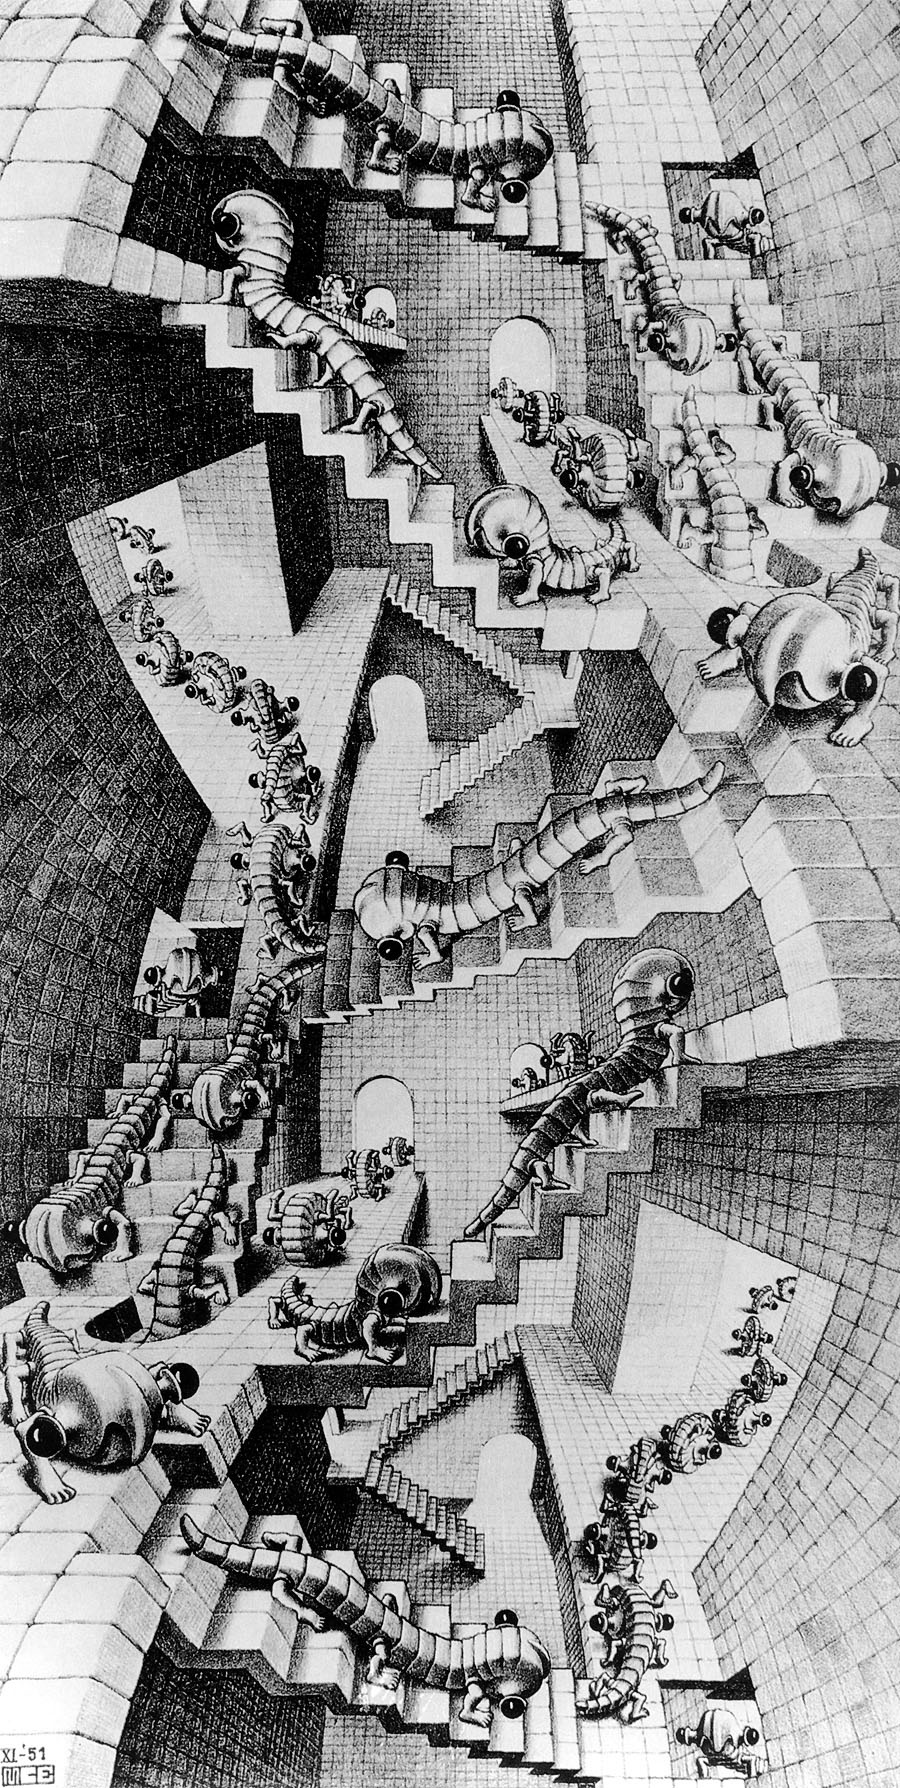 Maurits Cornelis Escher. House with stairs